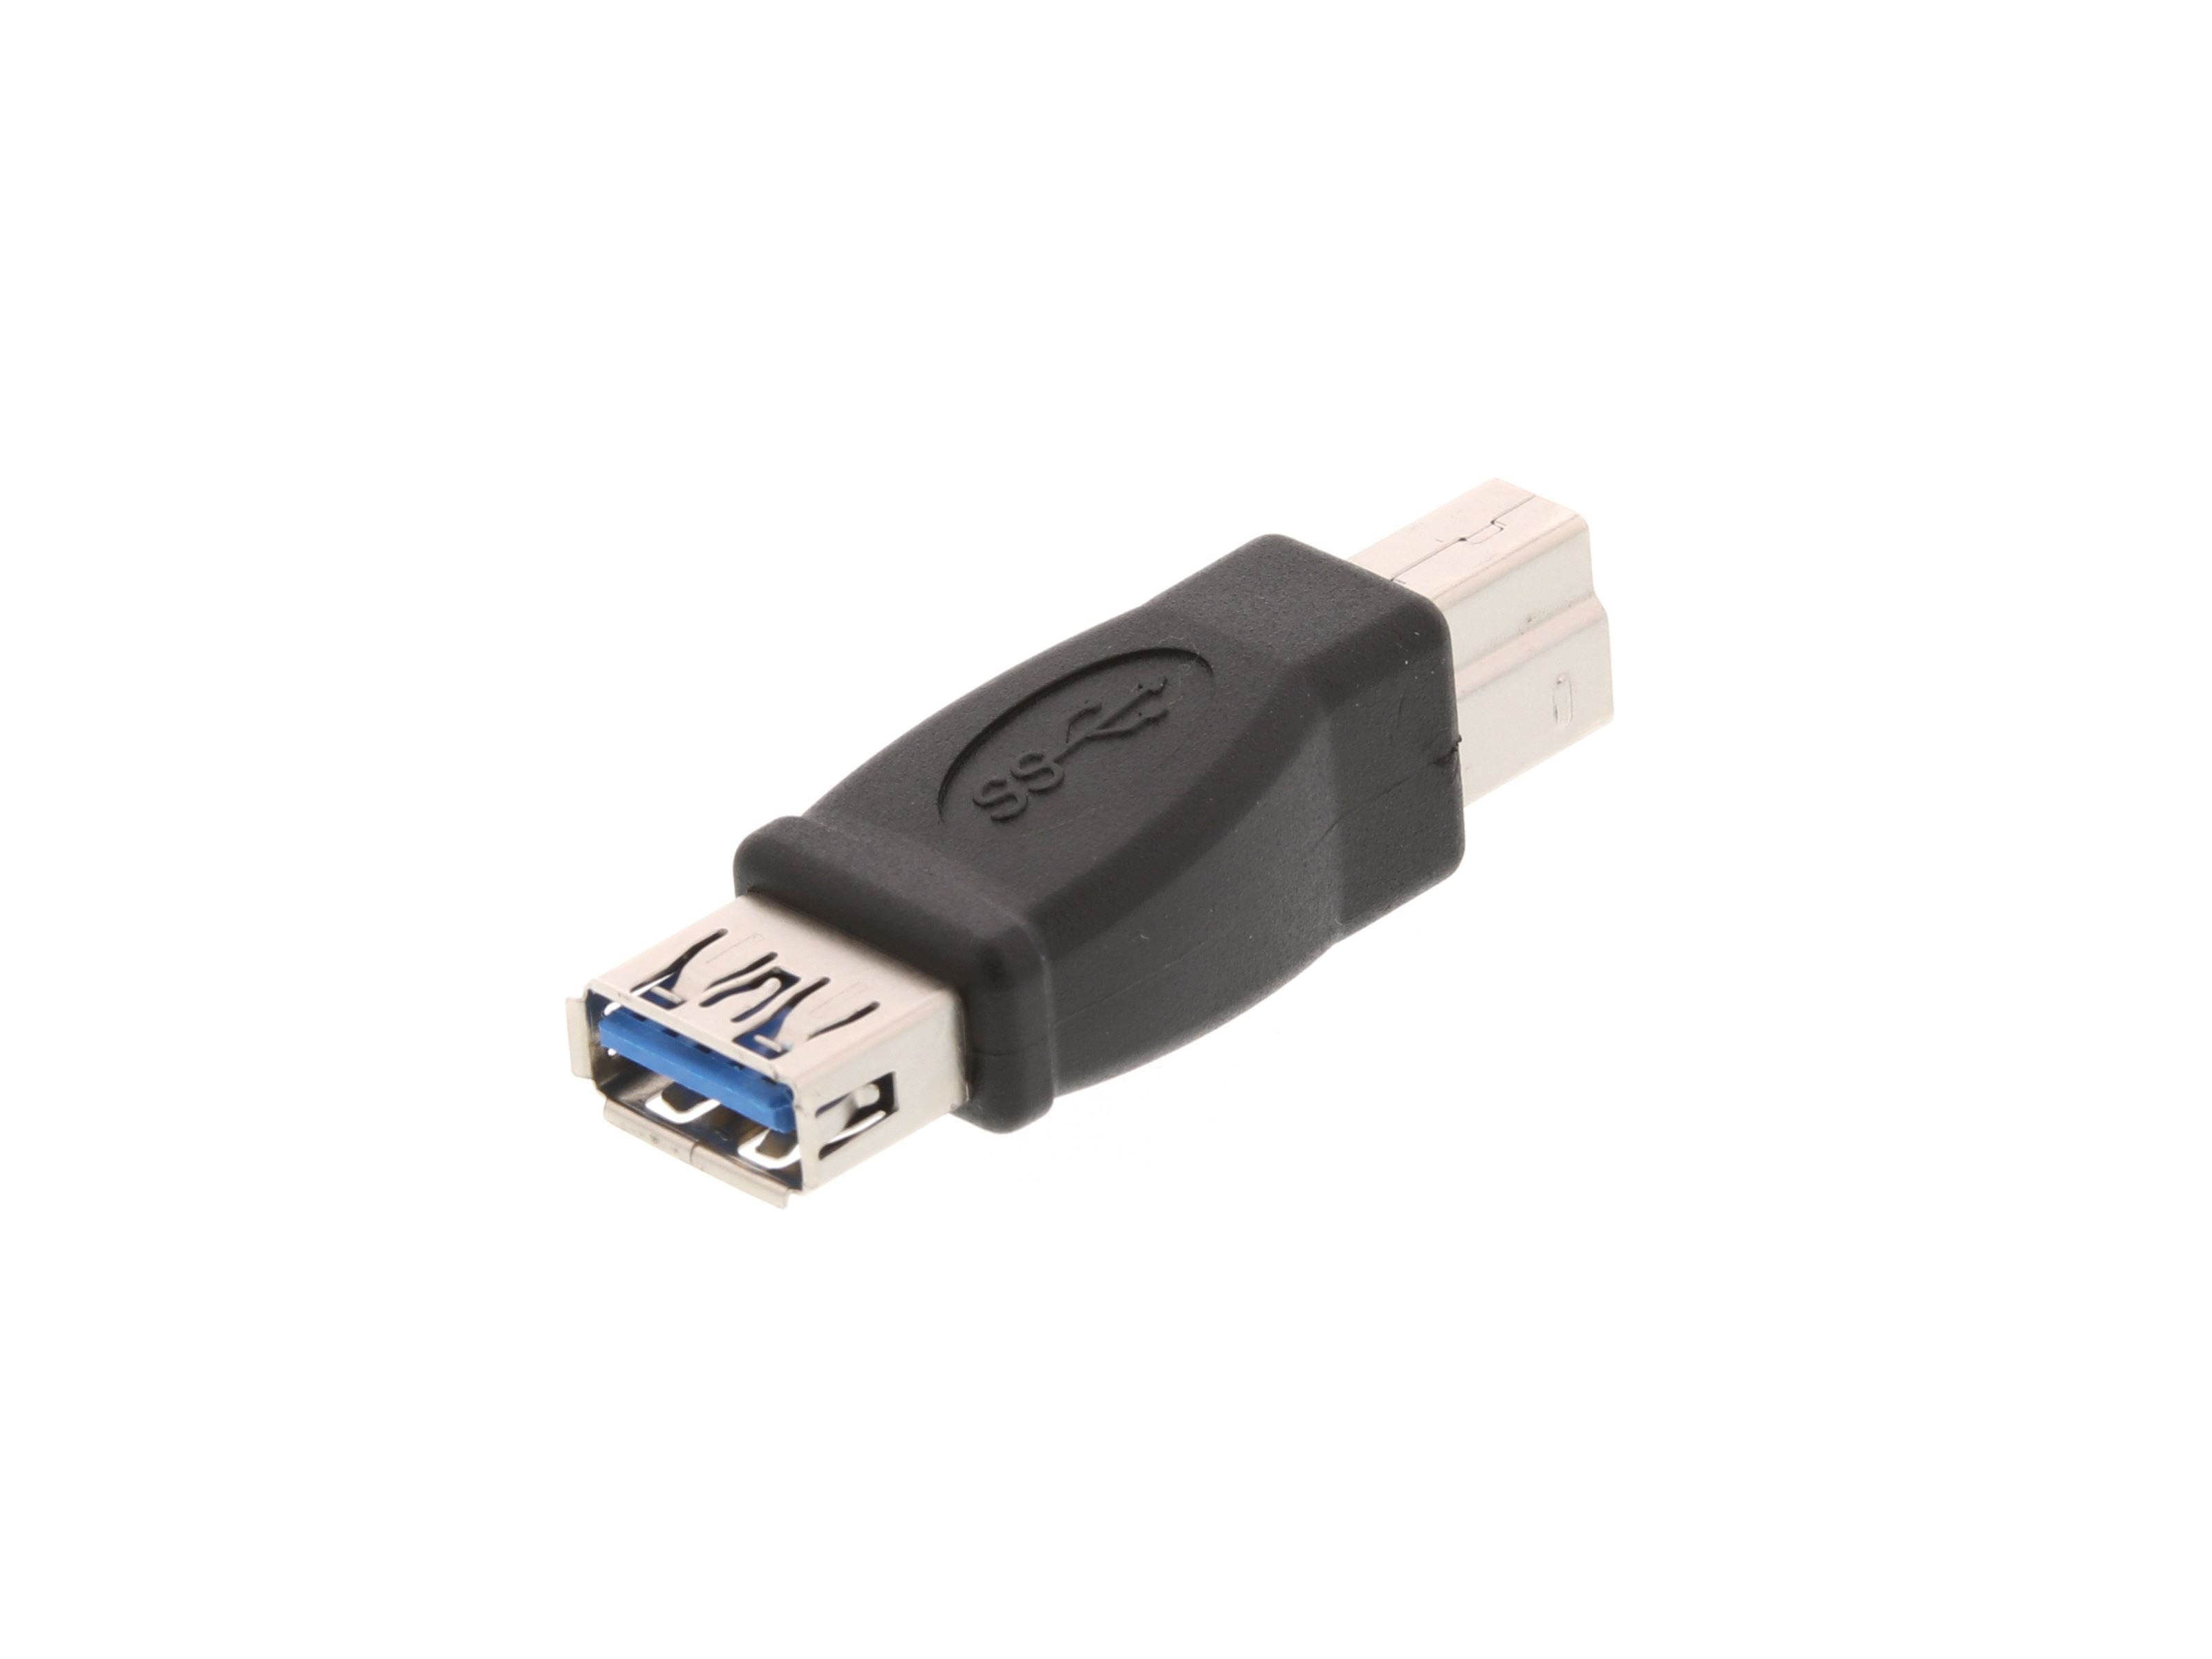 USB 3.0 Adapter USB A Female USB B Male - 5 Pack at Cables N More